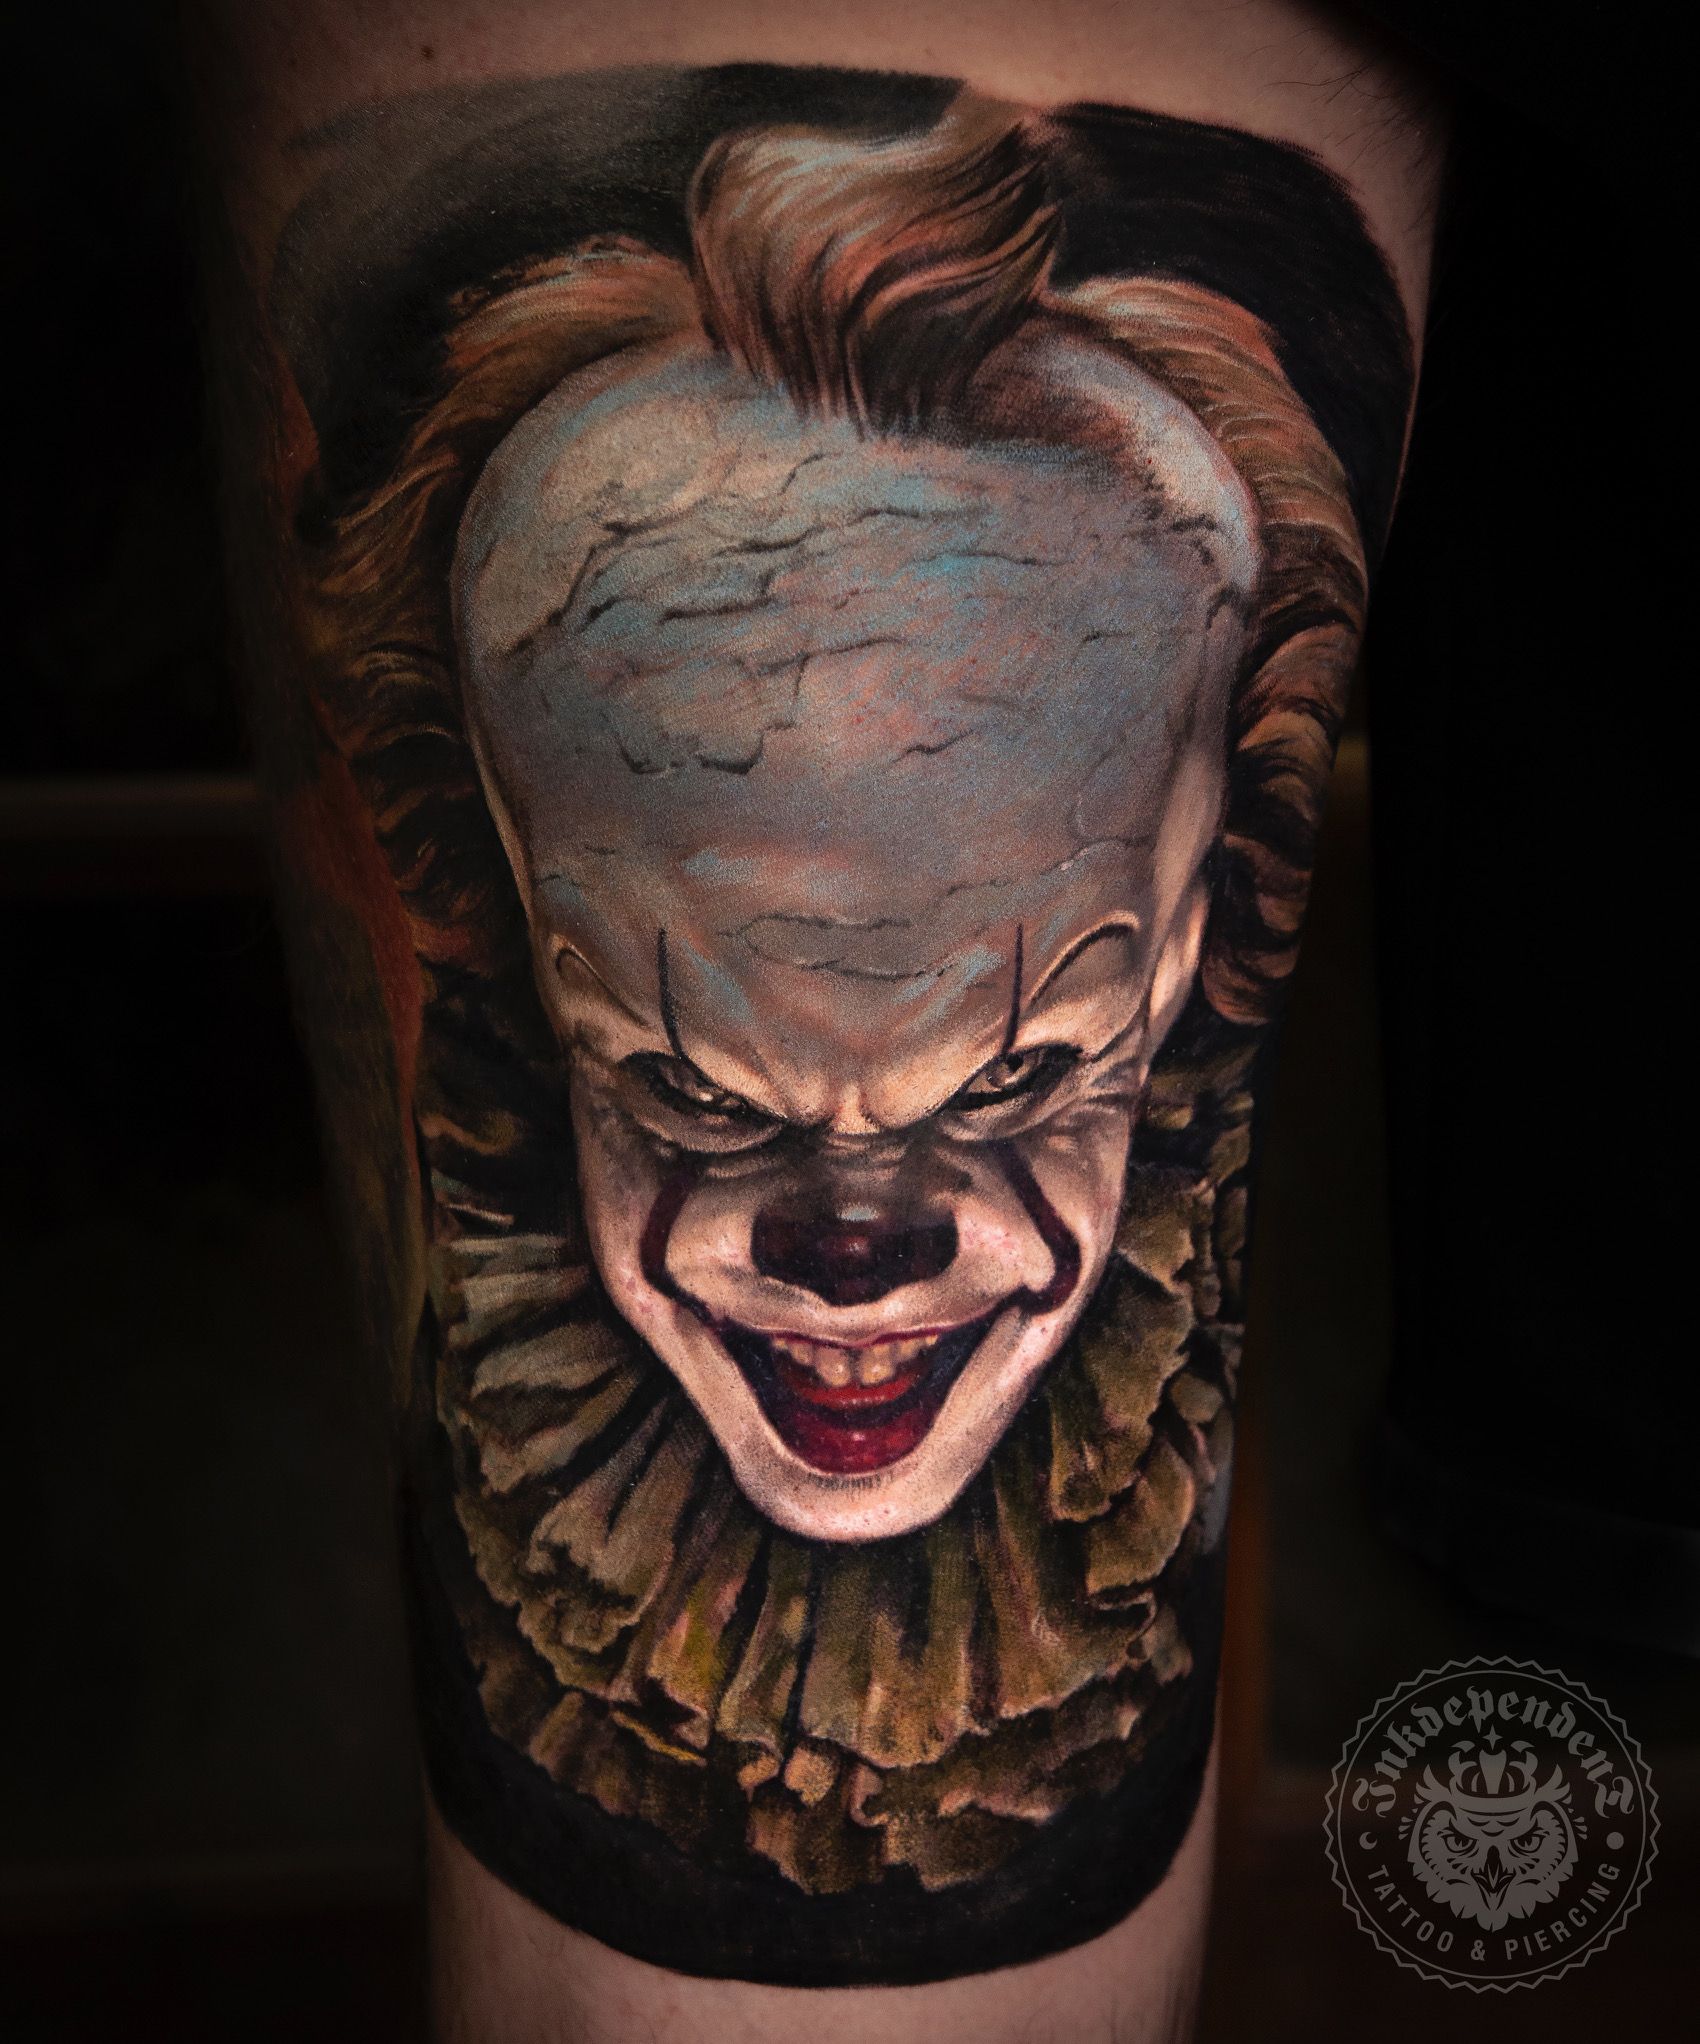 Guys Creepy Full Back Clown Tattoo Comes To Life When He Moves  UNILAD